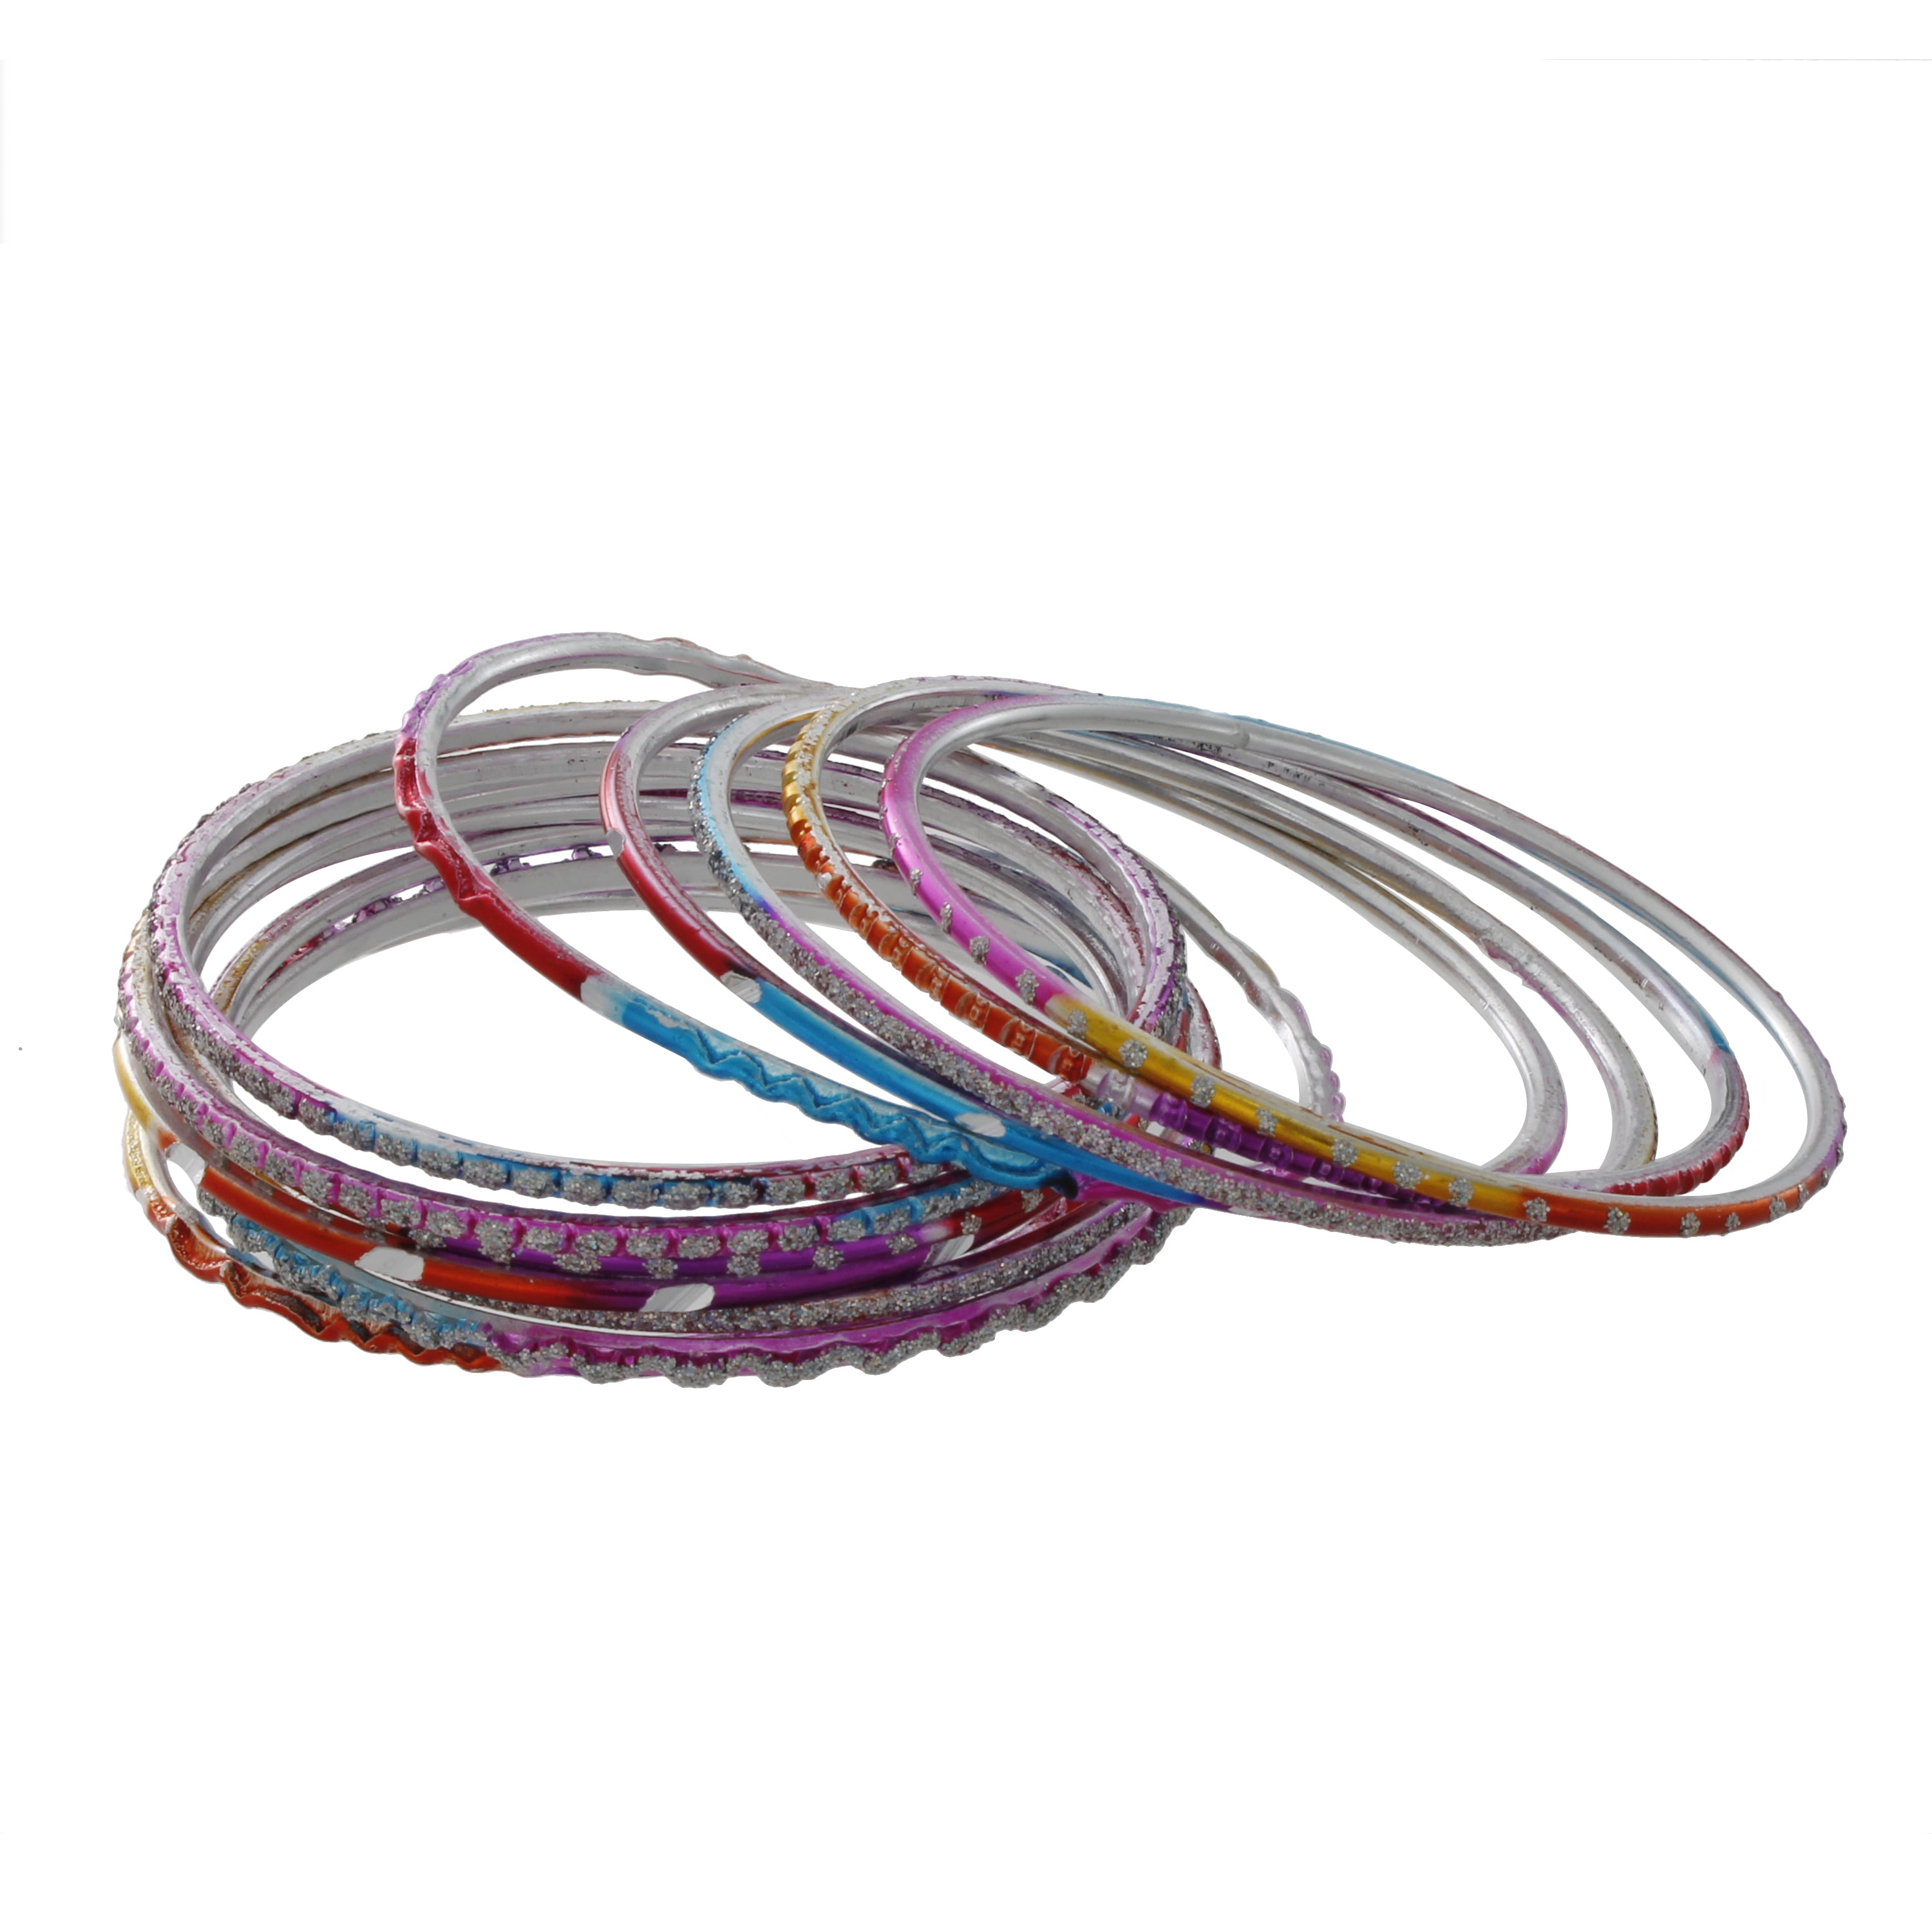 On Sale Set of 8 Multi Colored Plastic Beaded and Metal Expandable Bracelets Fashion Accessory Costume Jewelry